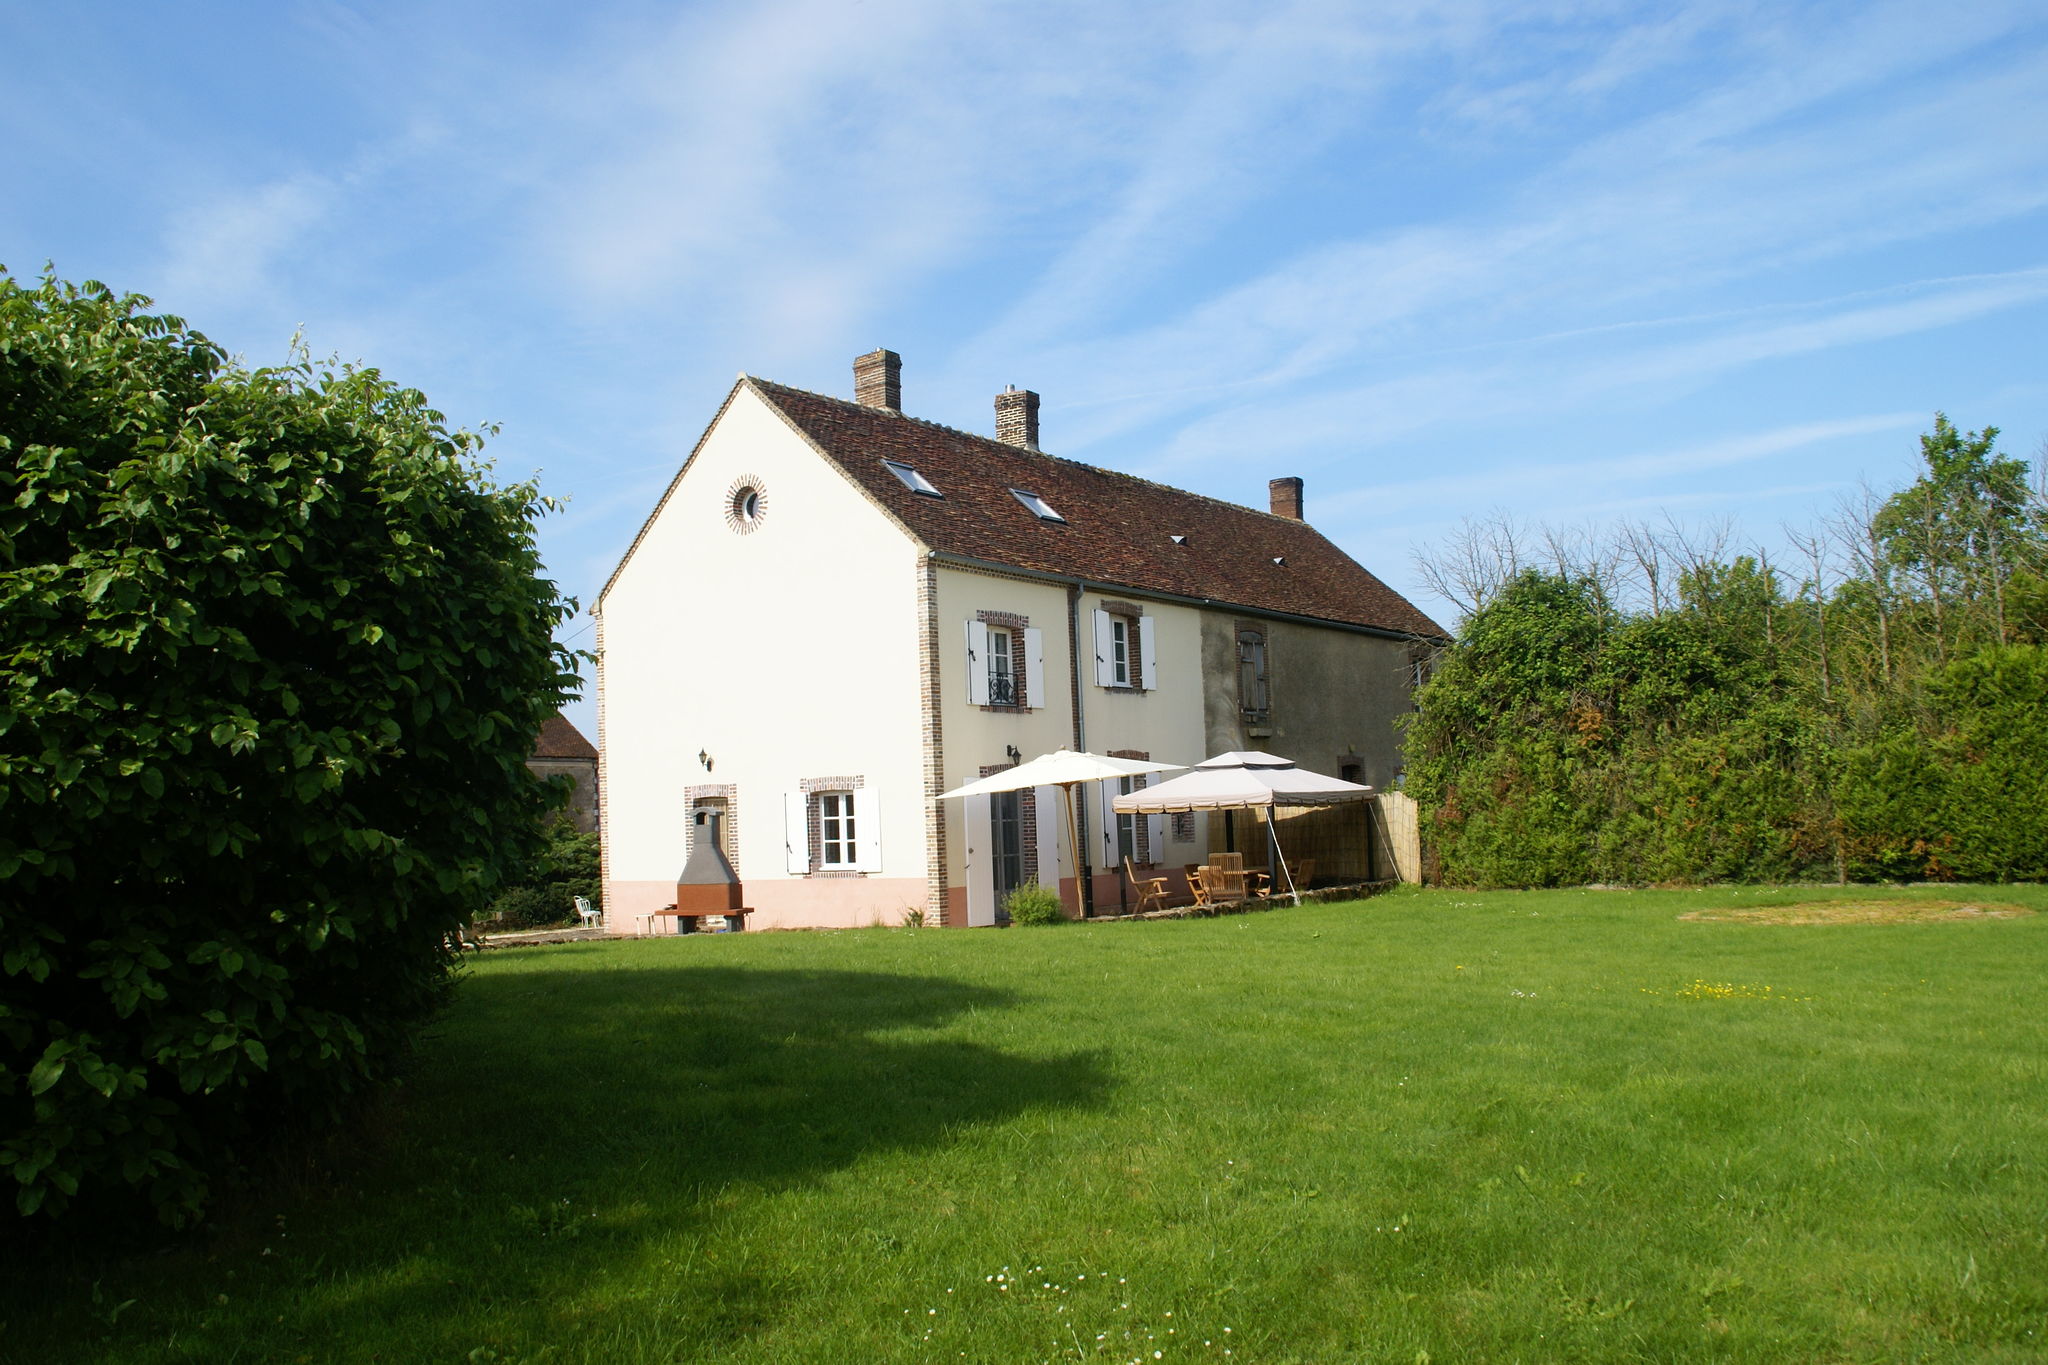 Authentic Burgundy holiday home with plenty of space and privacy, near Diges